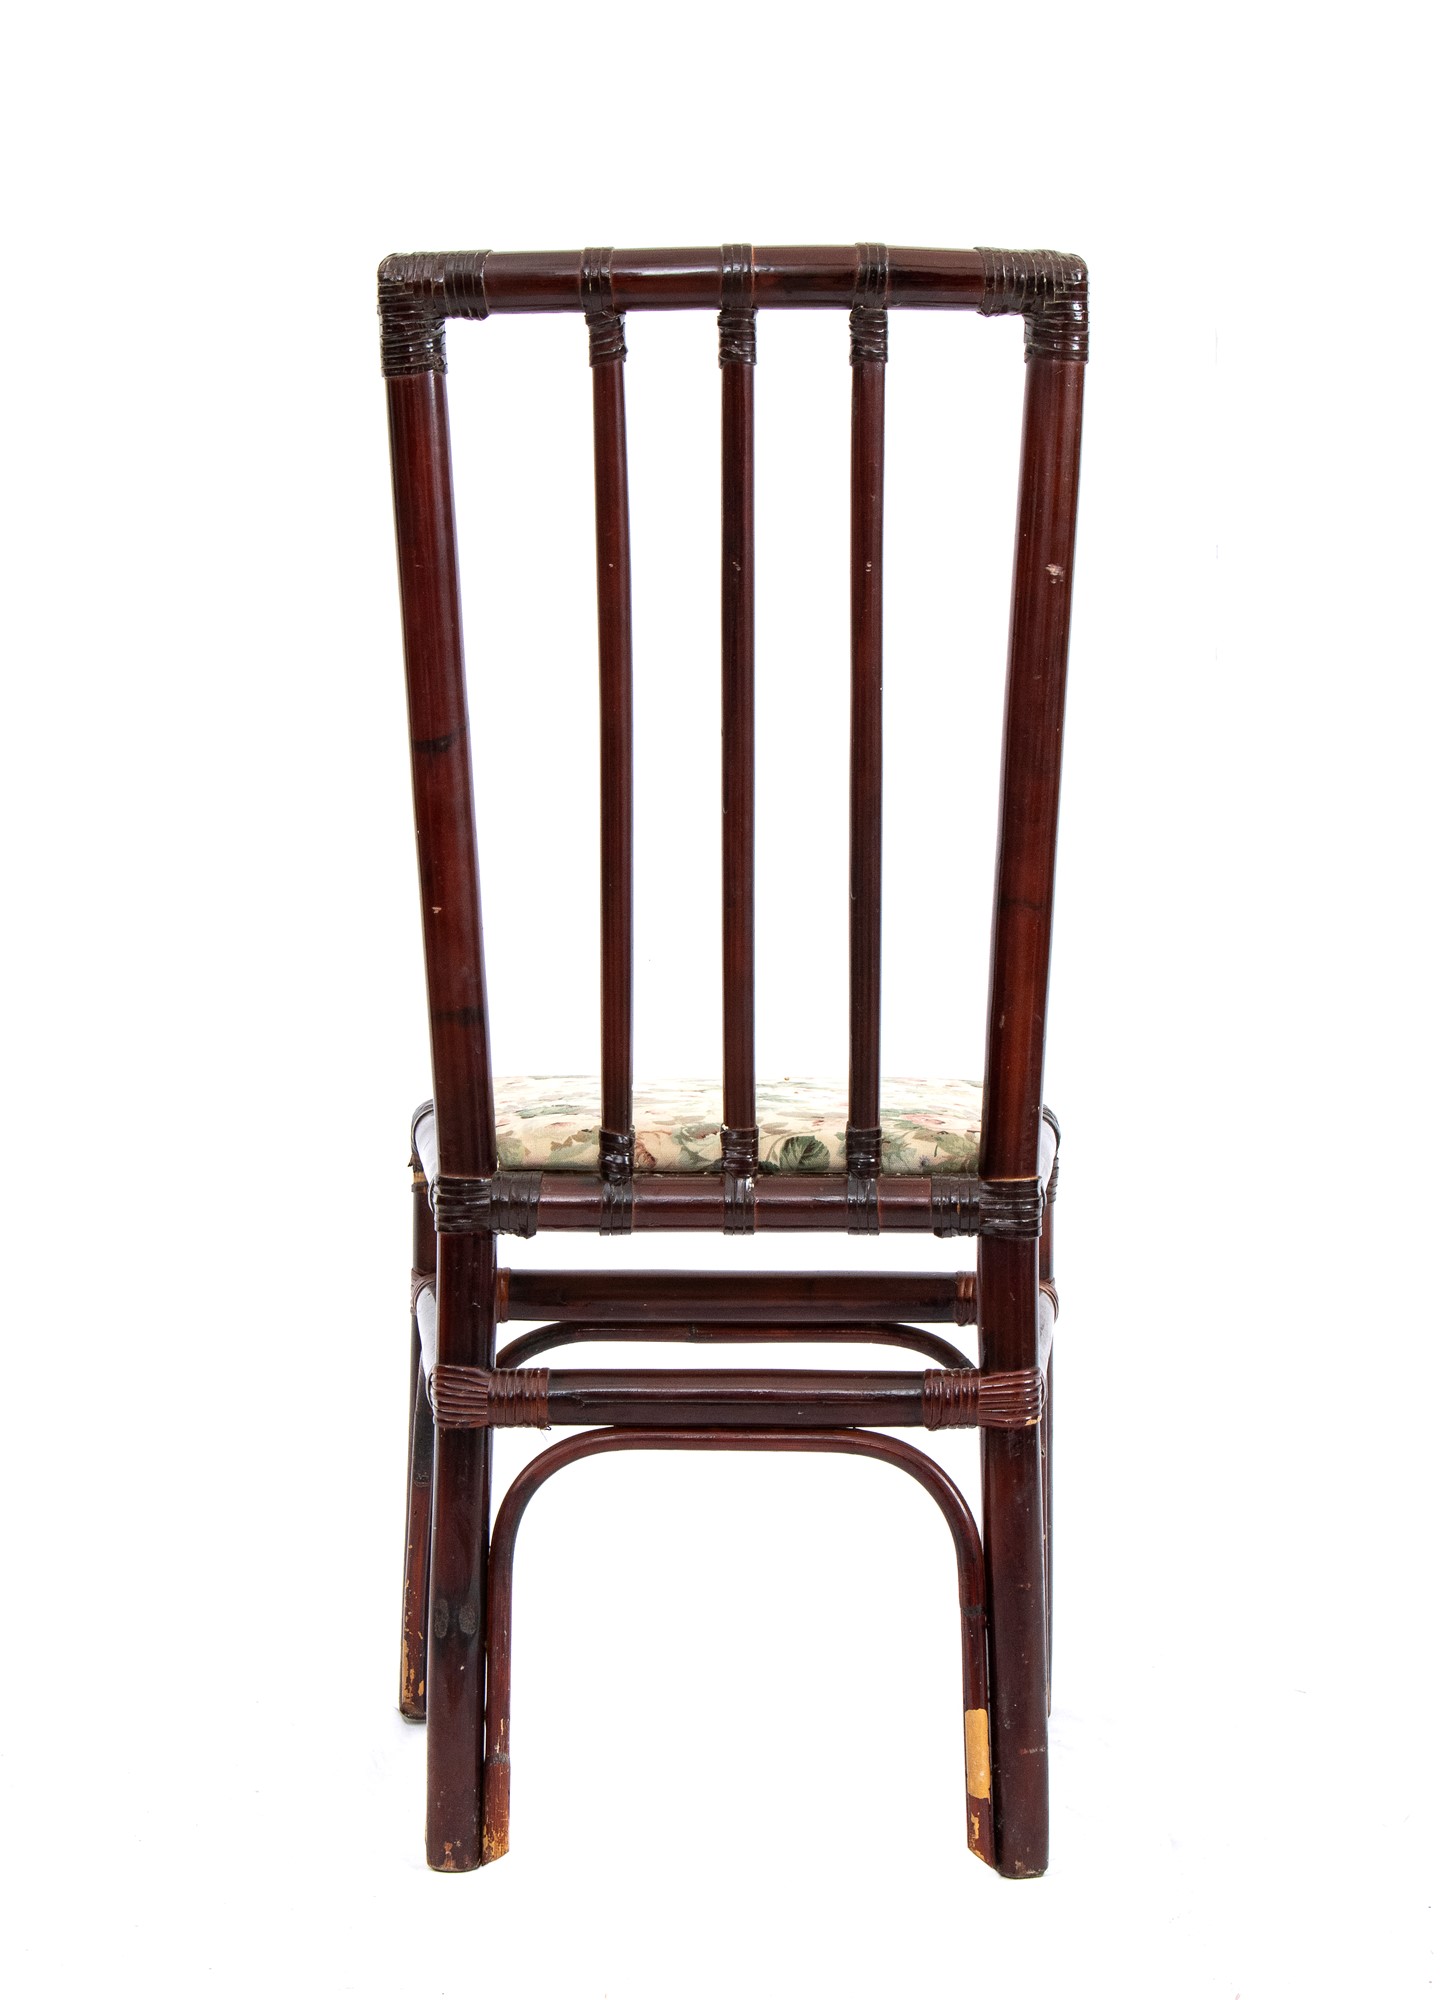 Six chairs with lacquered bamboo structure - Image 12 of 15